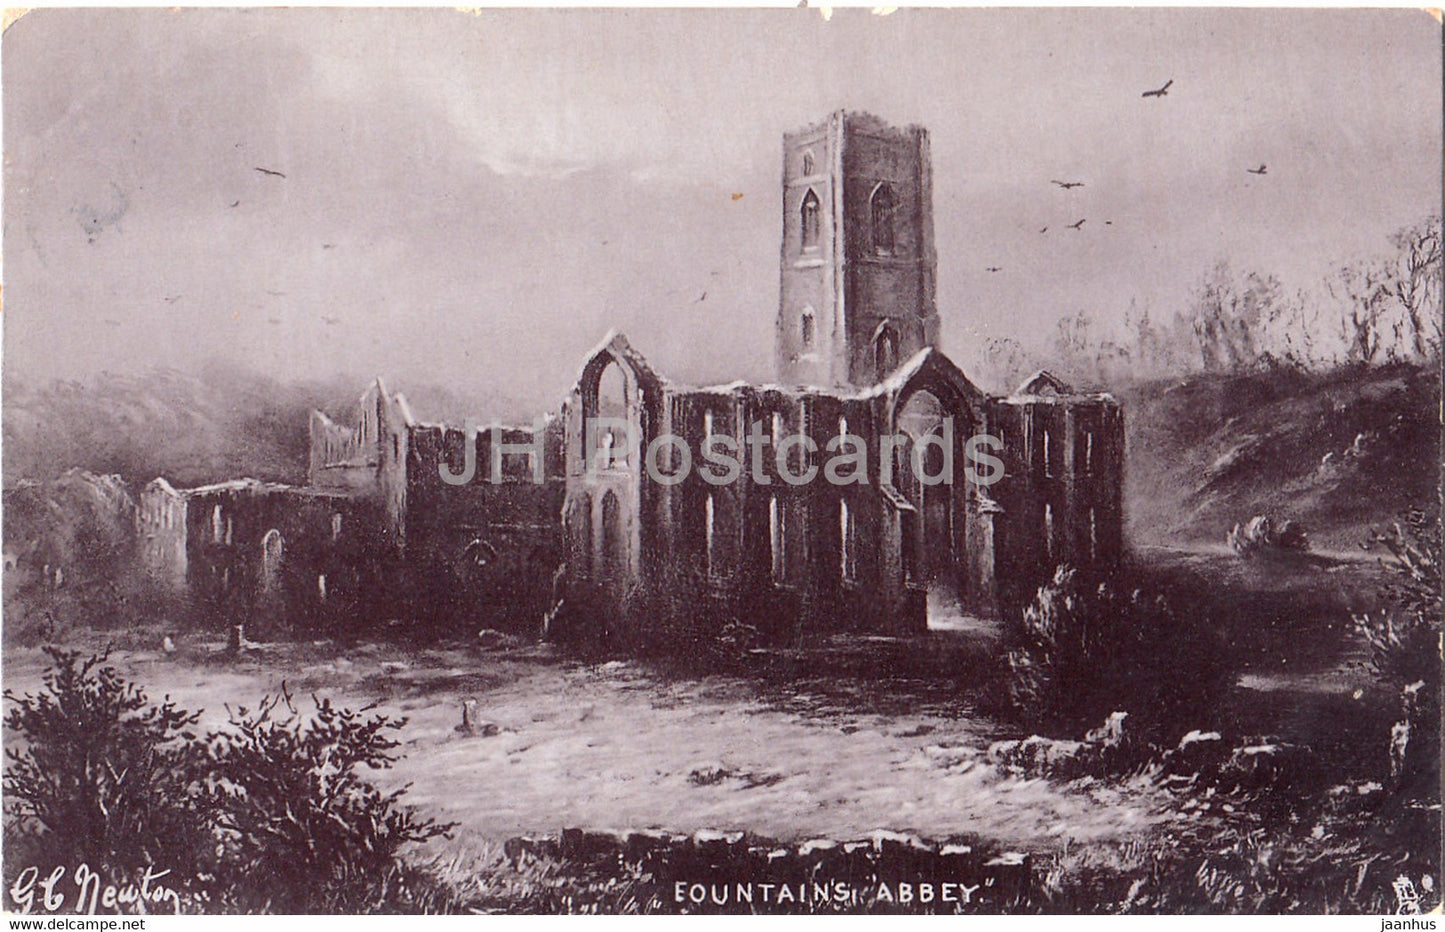 Fountain's Abbey - 6551 - old postcard - 1905 - England - United Kingdom - used - JH Postcards